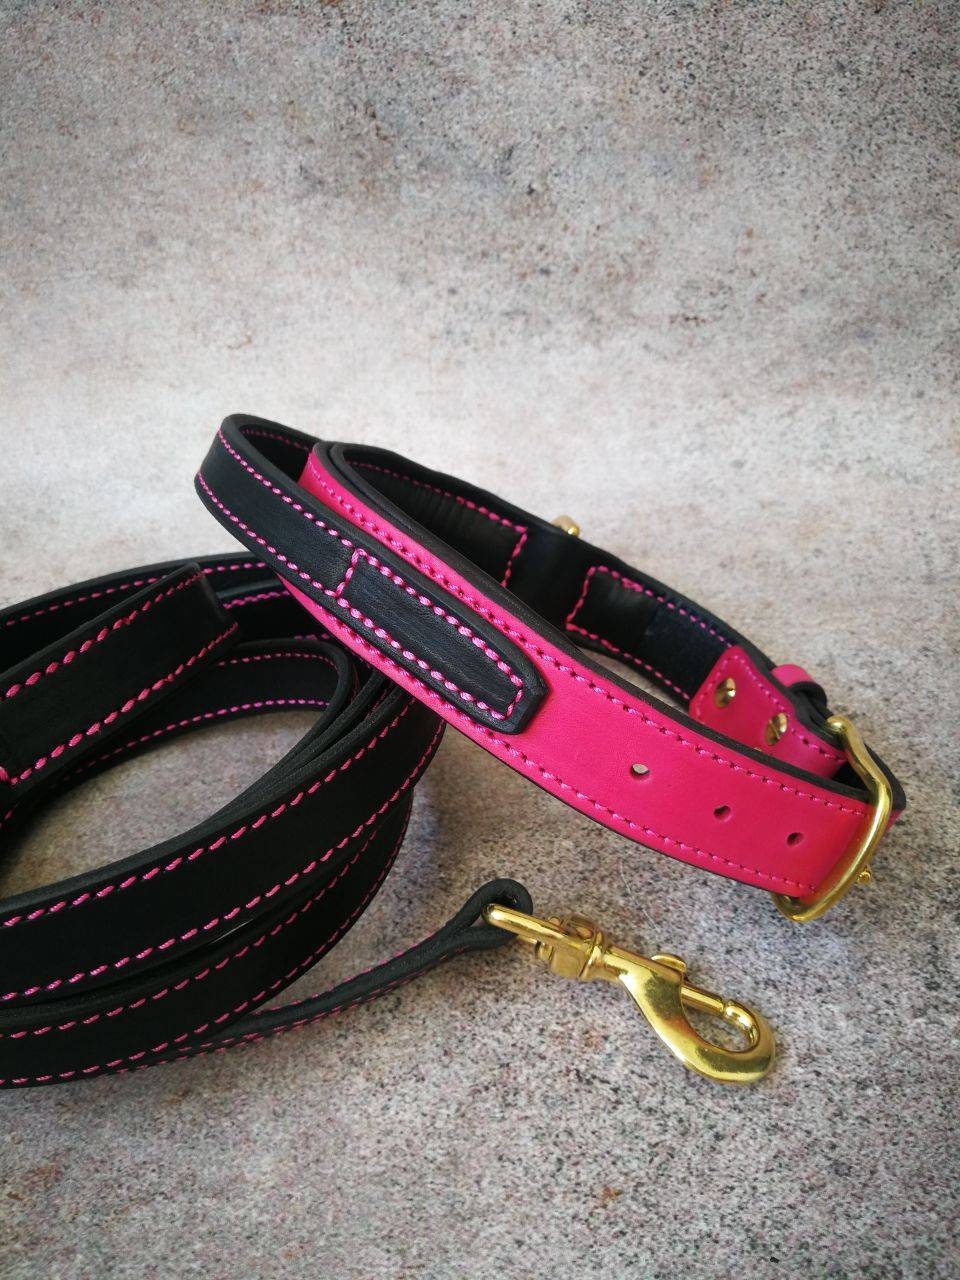 Pink and Black Leather Dog Matching Collar and Leash Set with Solid Brass Hardware, Strong Leather Brass Dog Collar stitched with pink